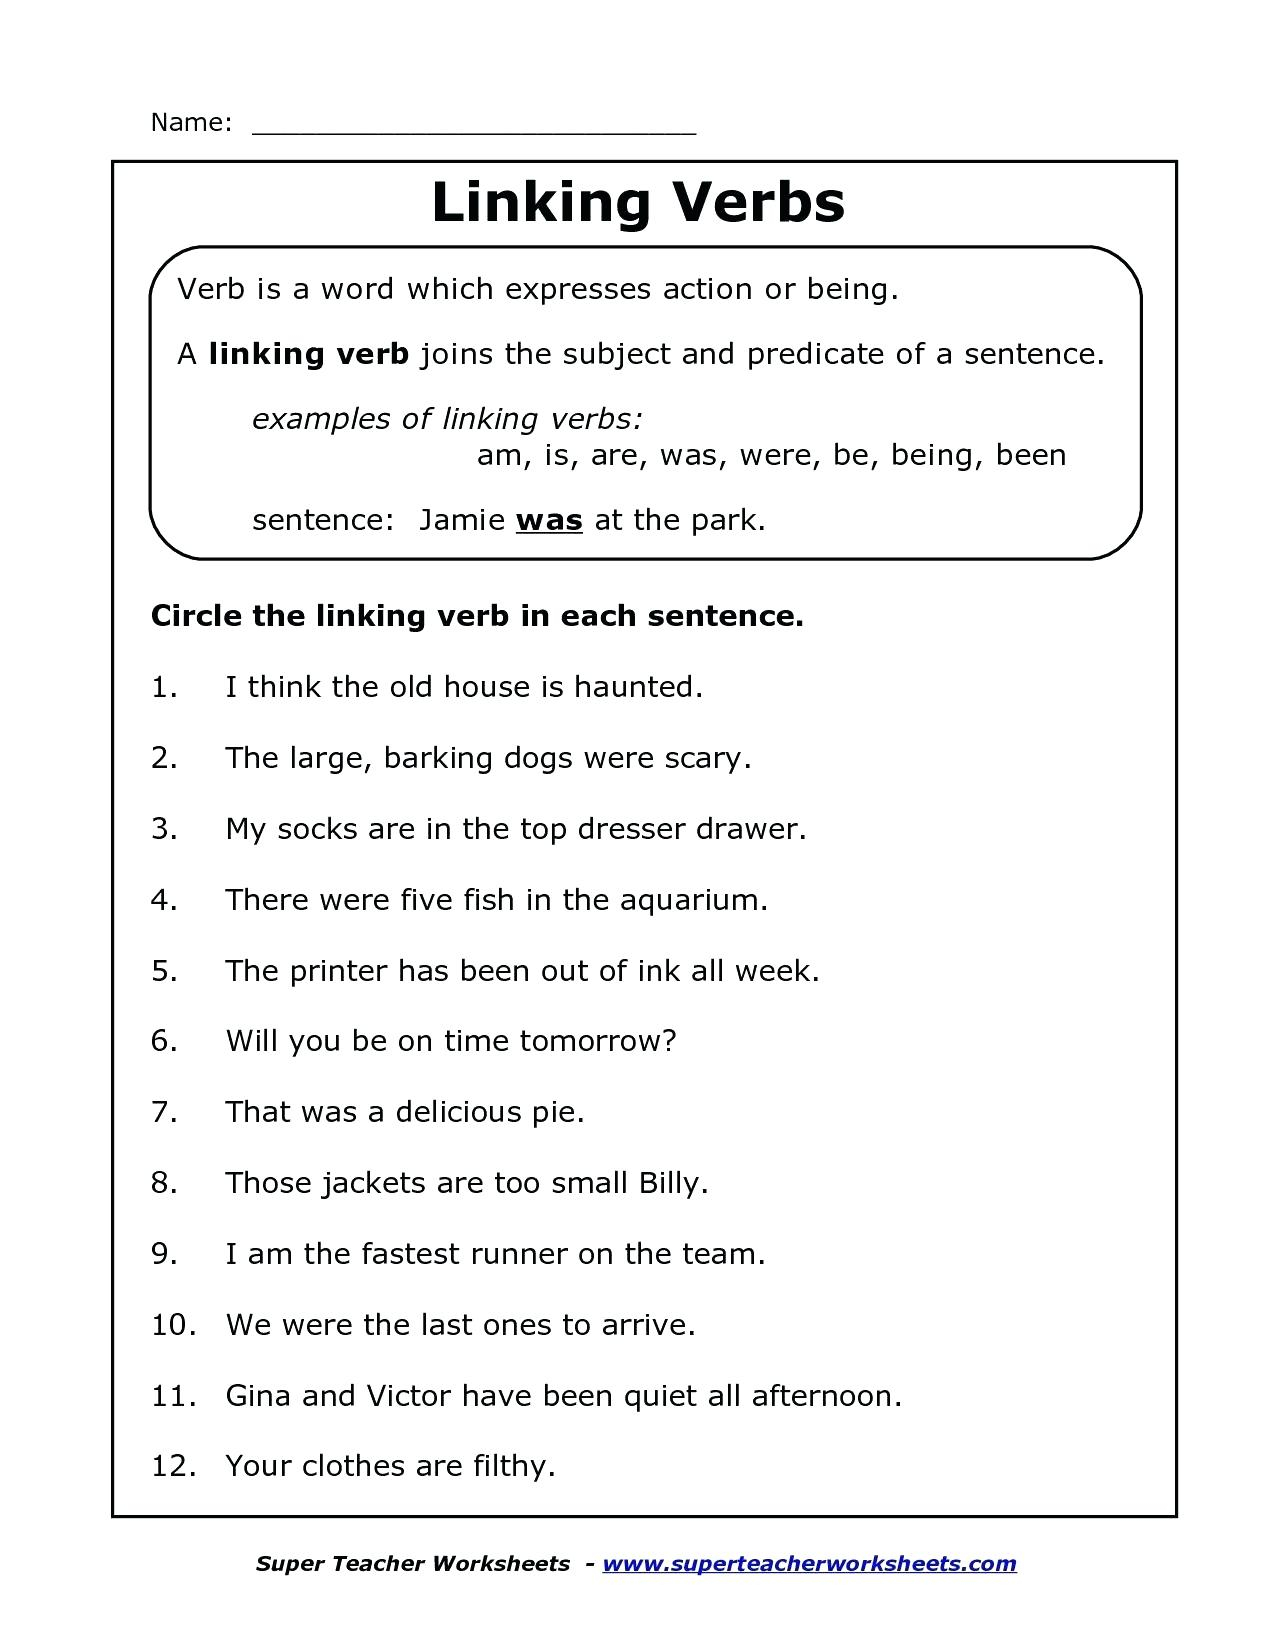 action-verbs-worksheets-for-grade-1-your-home-teacher-english-worksheets-grade-1-workbook-on